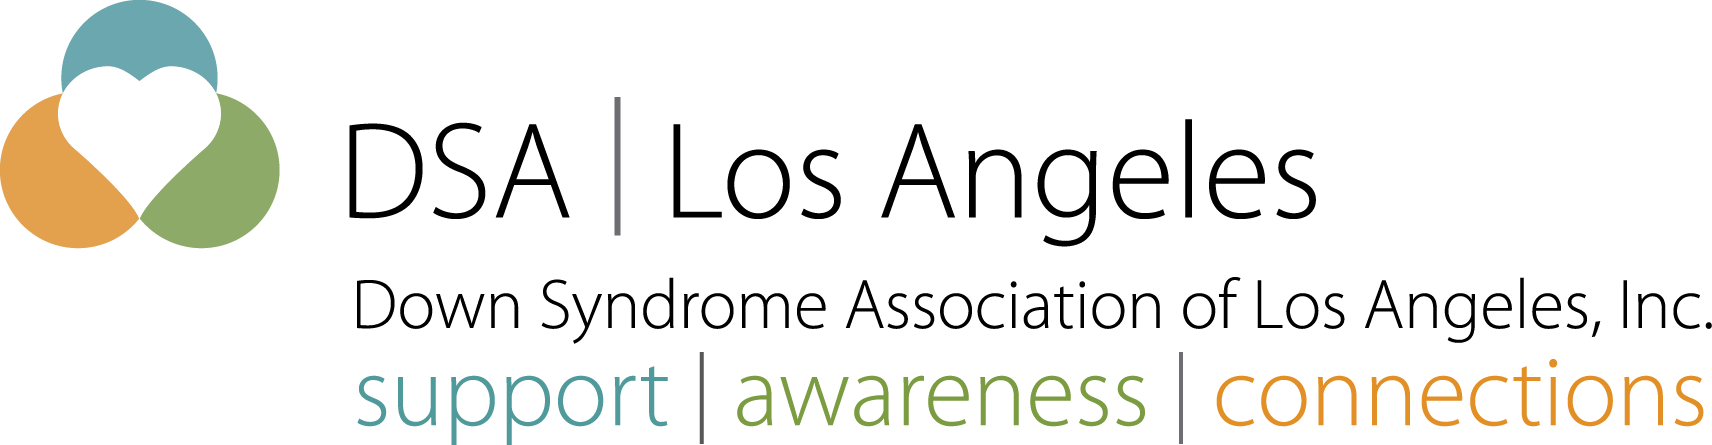 DSA - Los Angeles -- Down Syndrome Association of America -- support-awareness-connections Logo